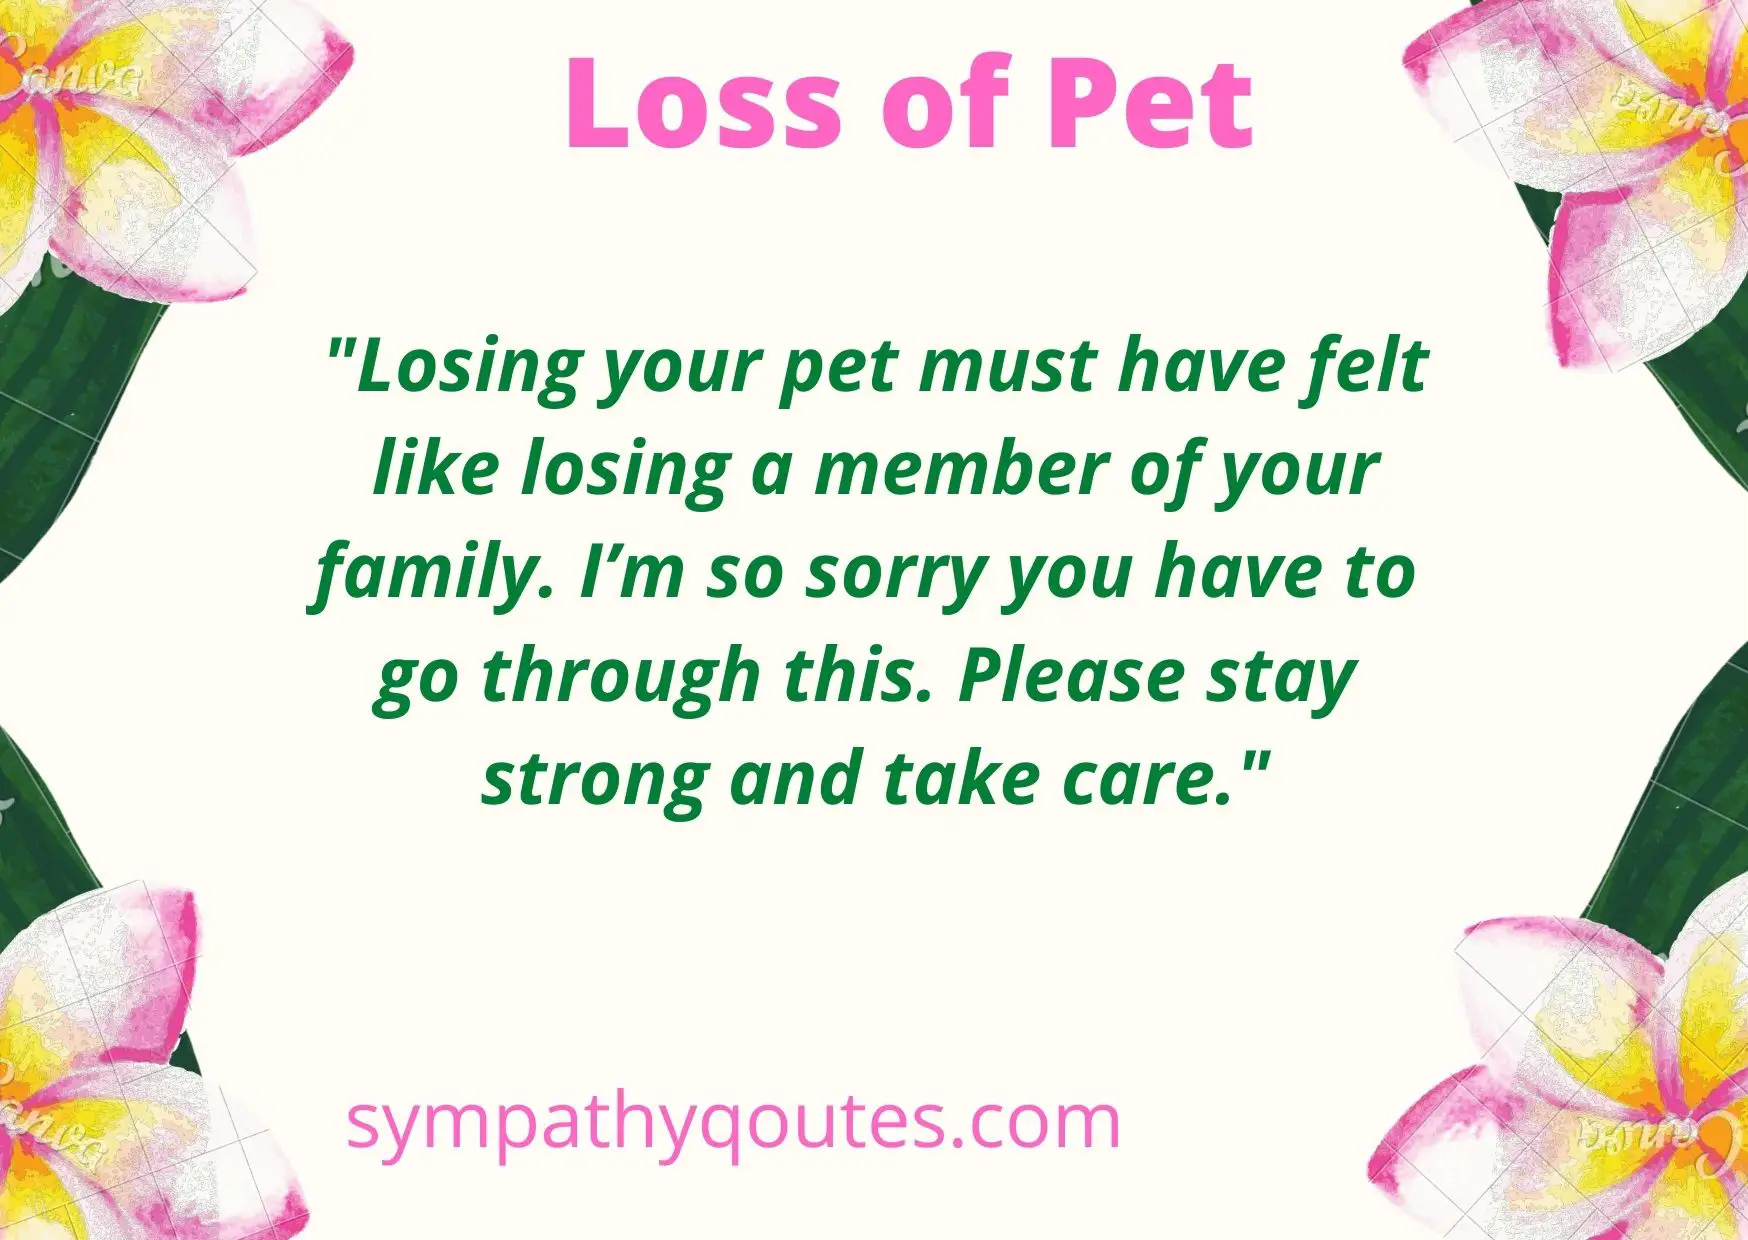 Sympathy messages for the loss of Pet